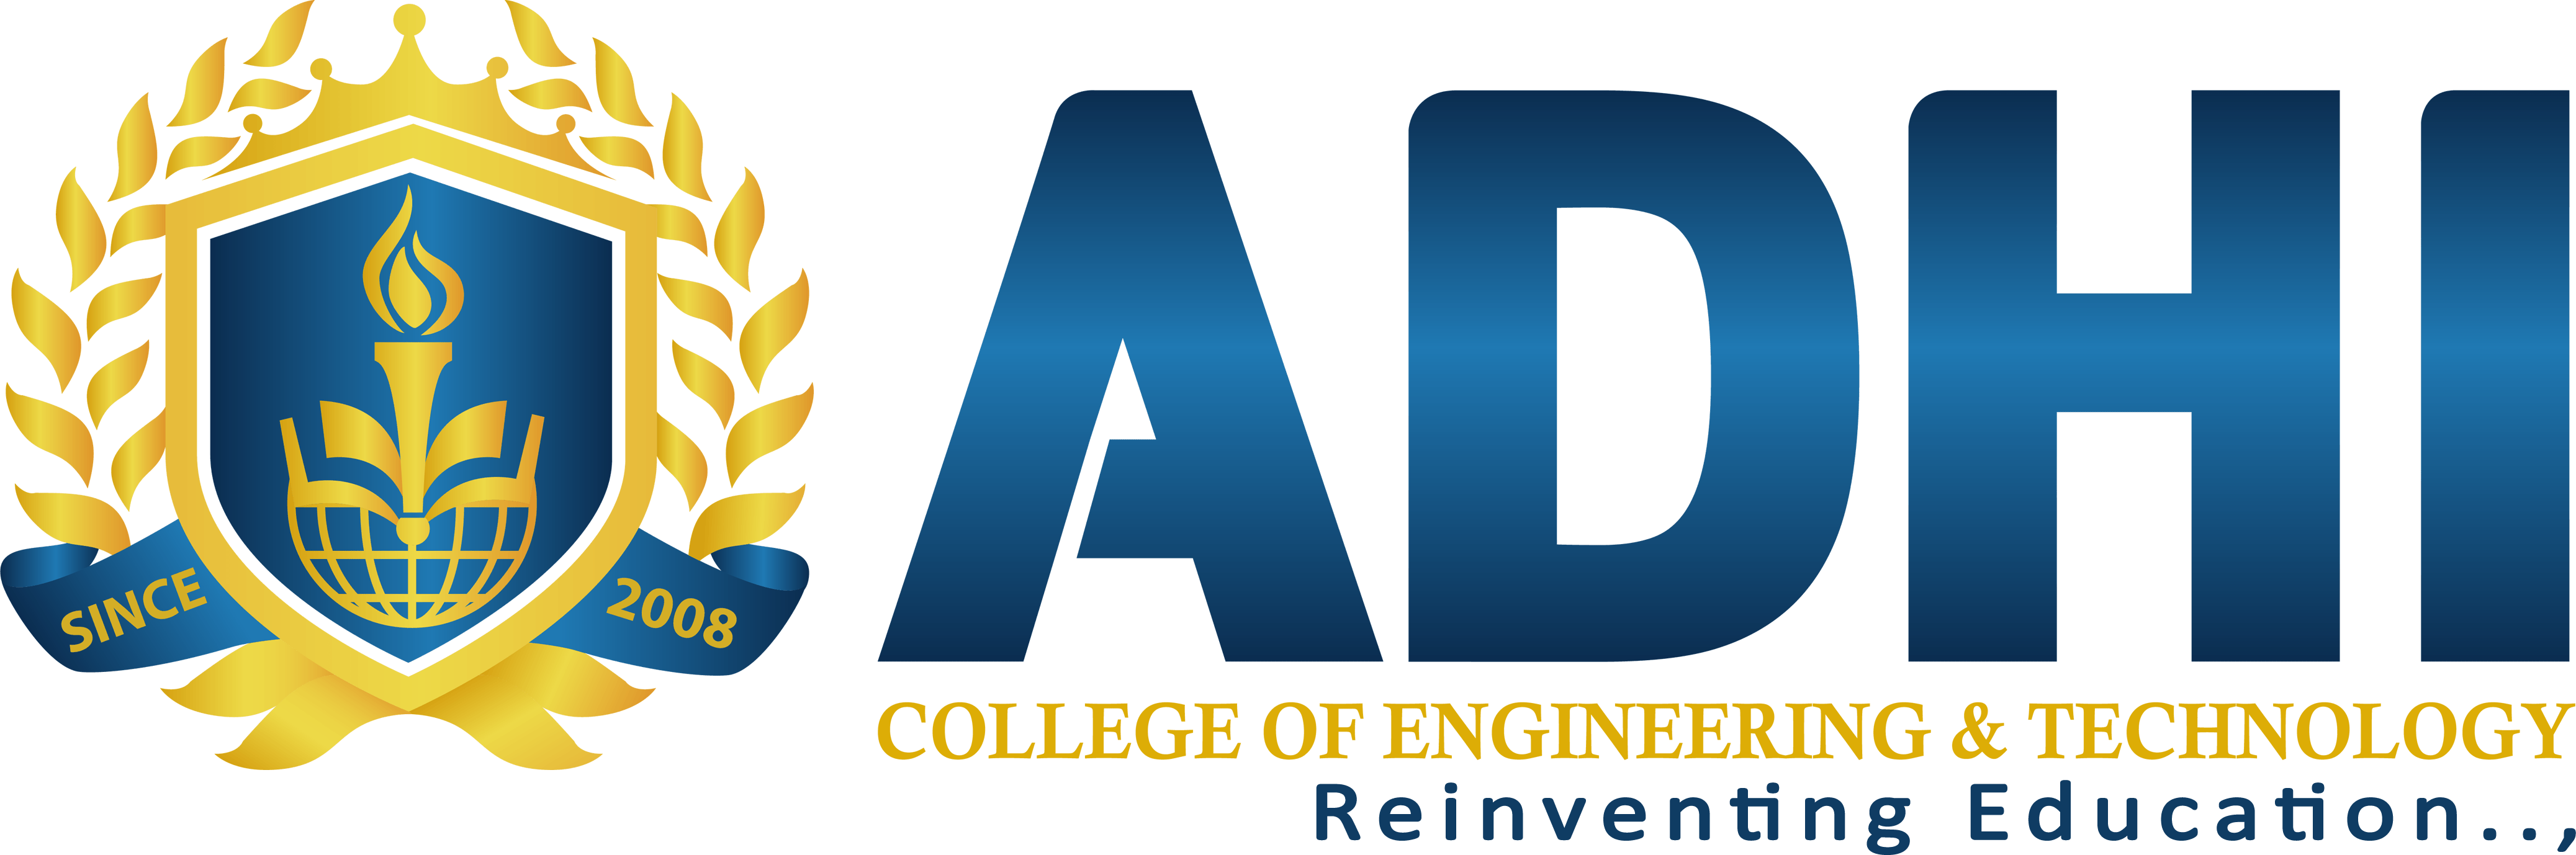 Blue Green College Logo - File:Adhi Engineering College logo.png - Wikimedia Commons